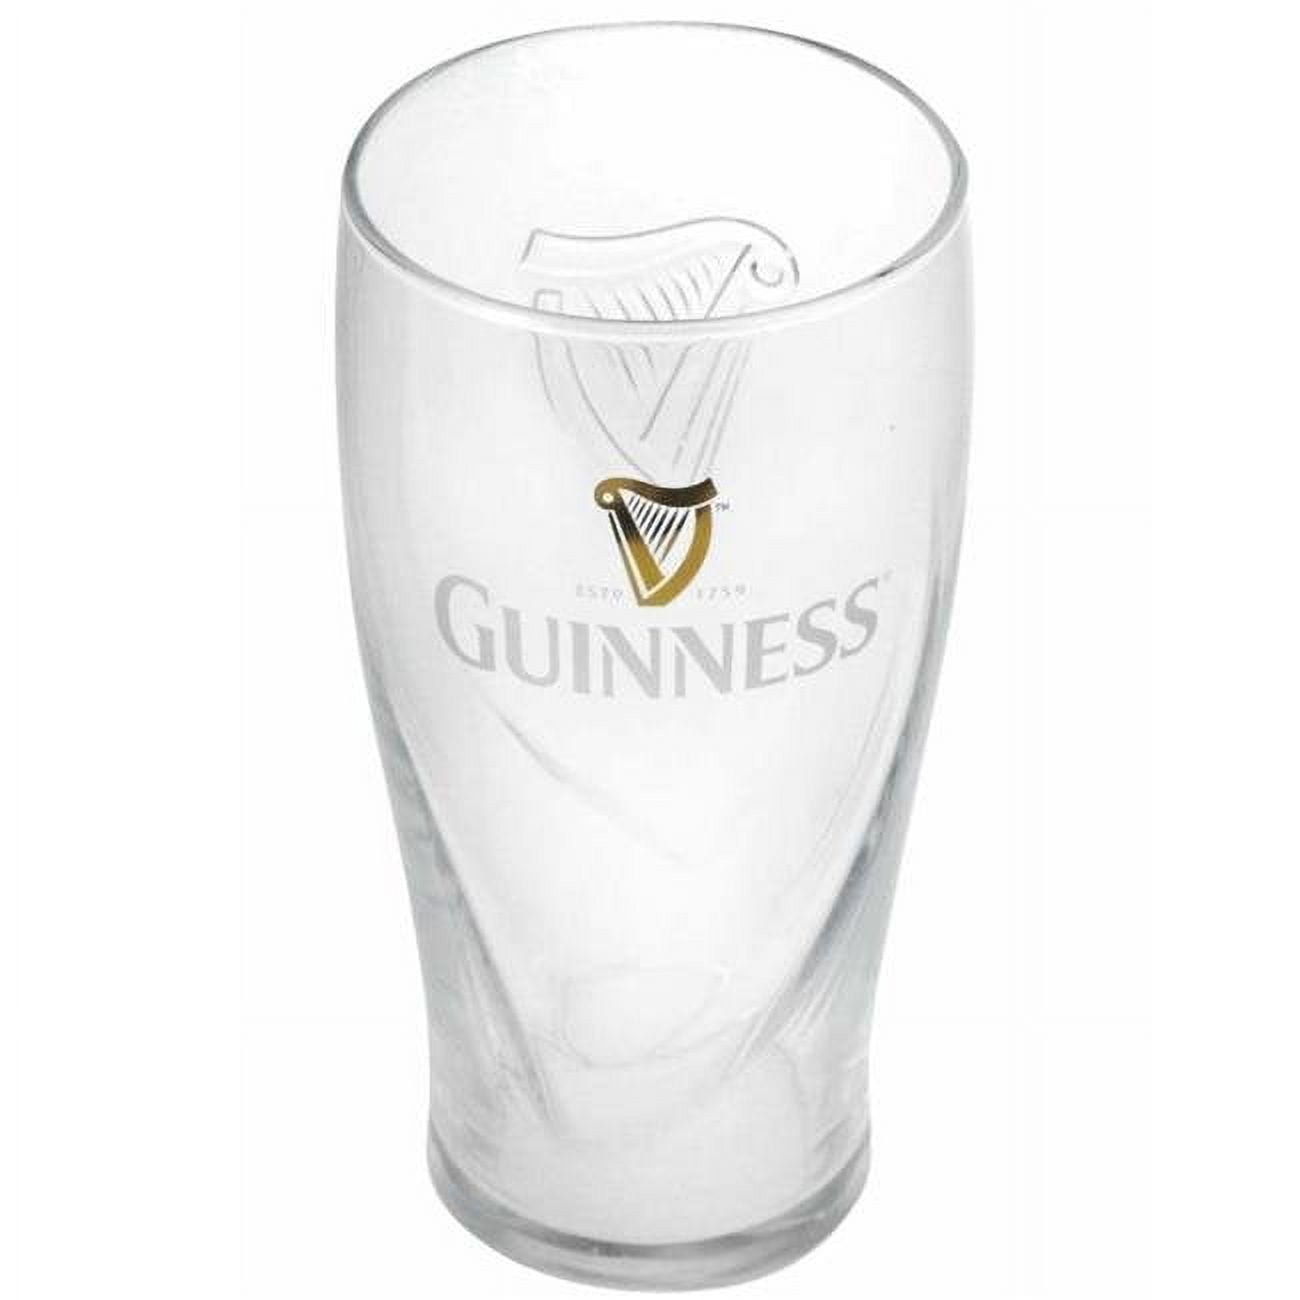 New Guinness glasses display exact number of alcohol units